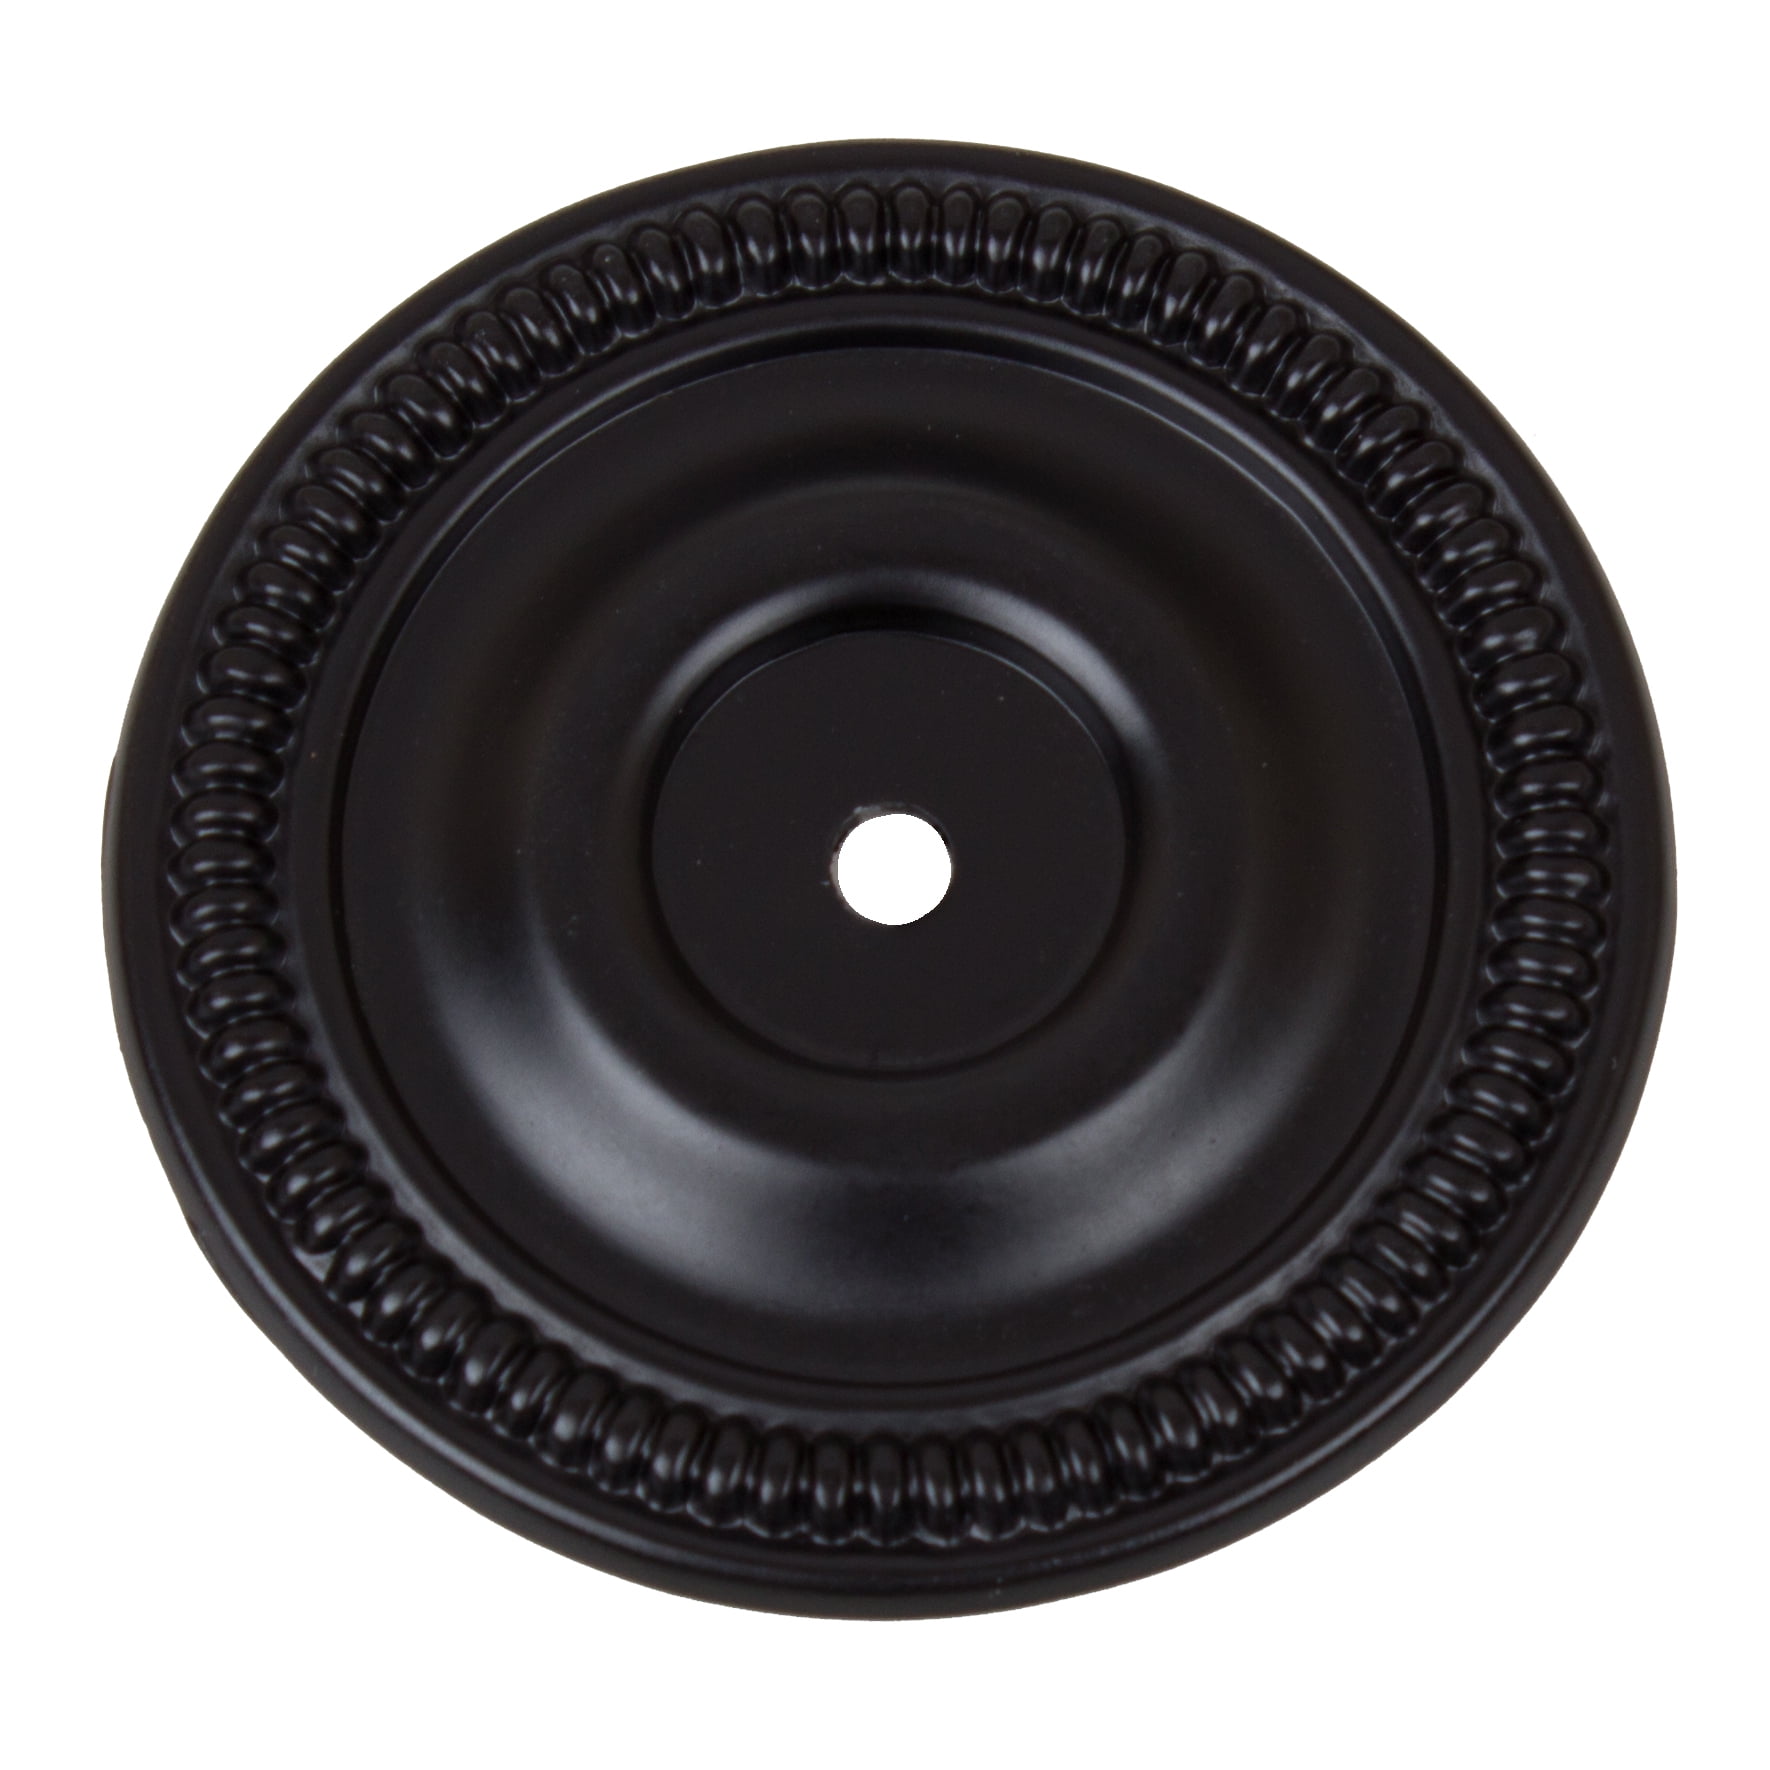 GlideRite 2.5-inch Matte Black Round Back Plates (Pack of 10 or 25) Matte Black - Pack of 25